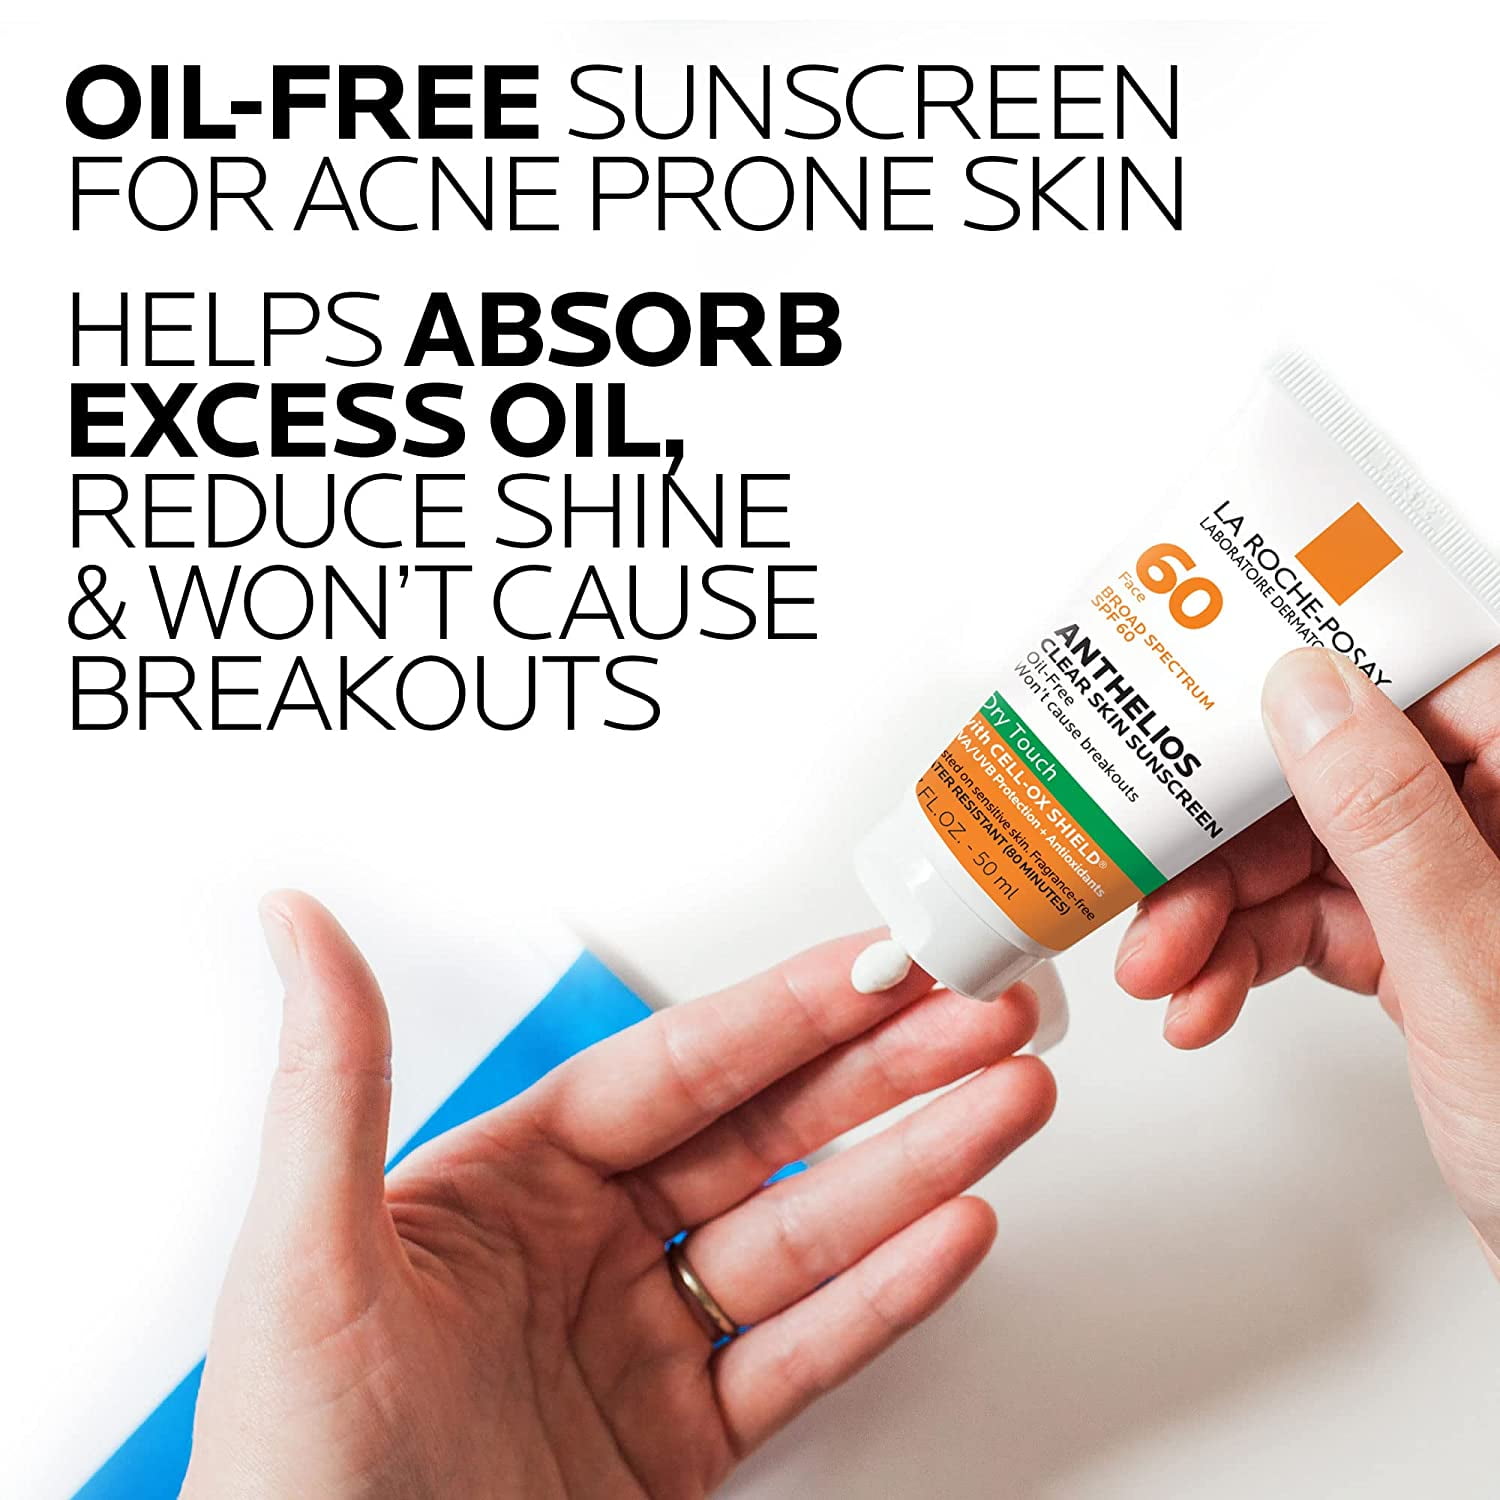 udstilling at tiltrække magi La Roche-Posay Anthelios Clear Skin Dry Touch Sunscreen SPF 60, Oil Free  Face Sunscreen for Acne Prone Skin, Won't Cause Breakouts, Non-Greasy,  Oxybenzone Free - Walmart.com